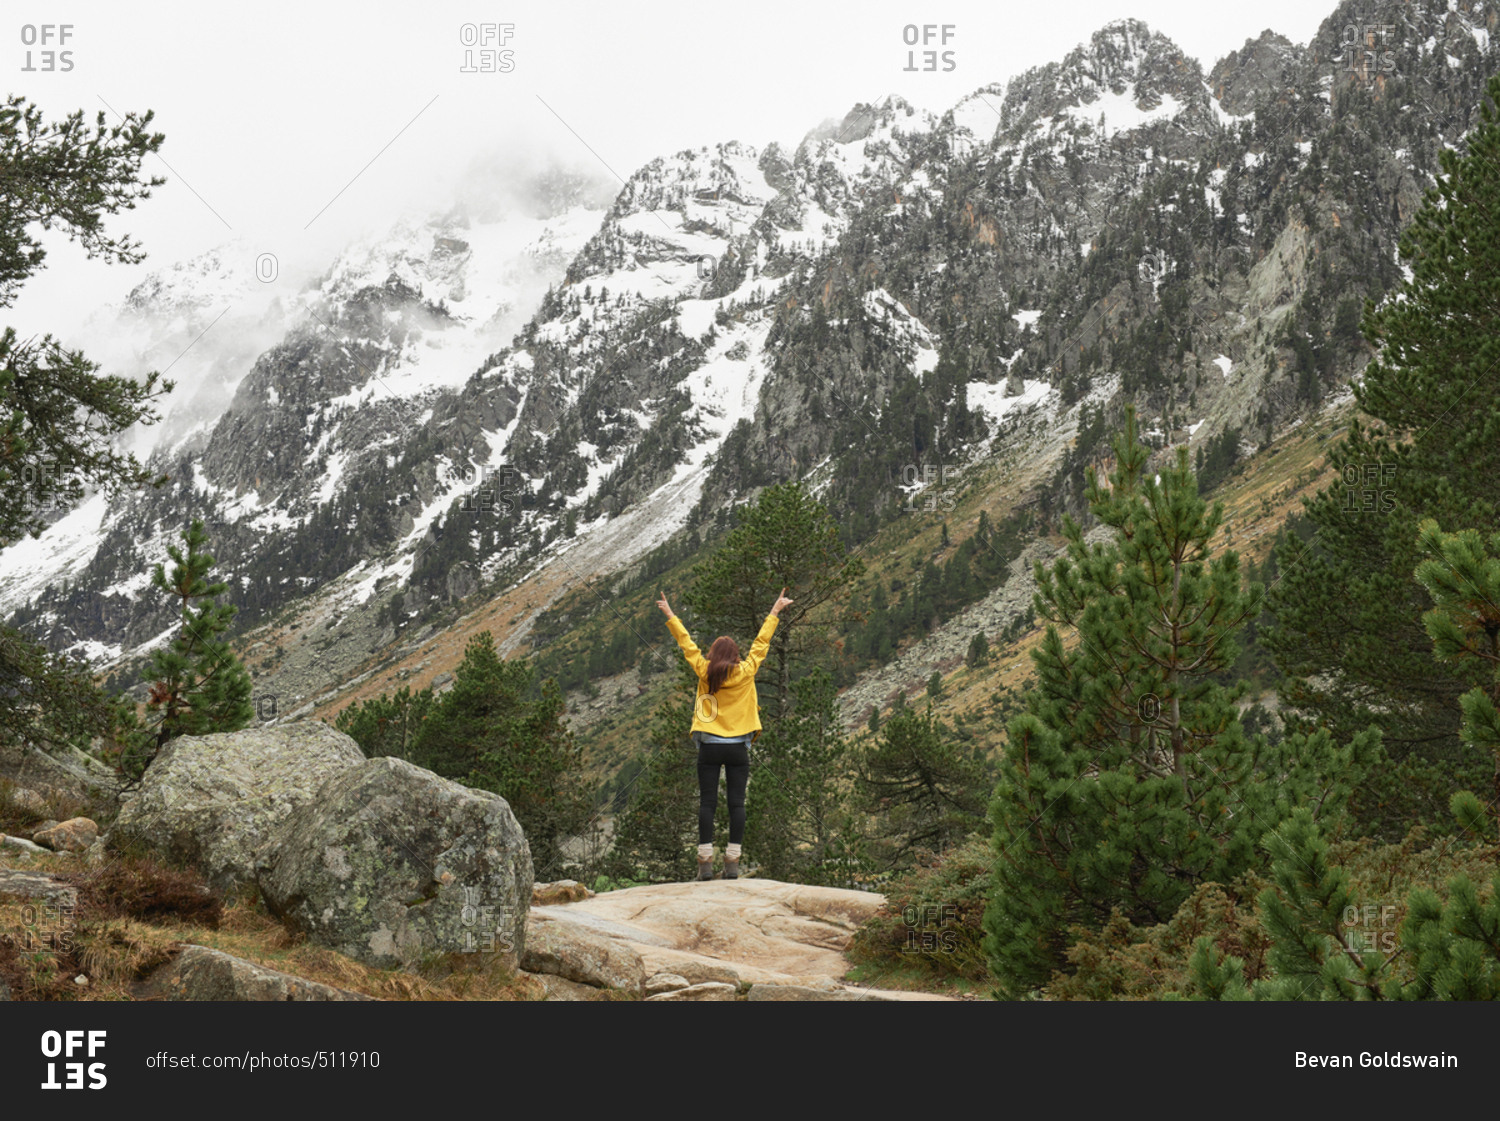 Travel adventure hiker woman celebrates arms outstretched enjoying beautiful nature forest landscape wanderlust